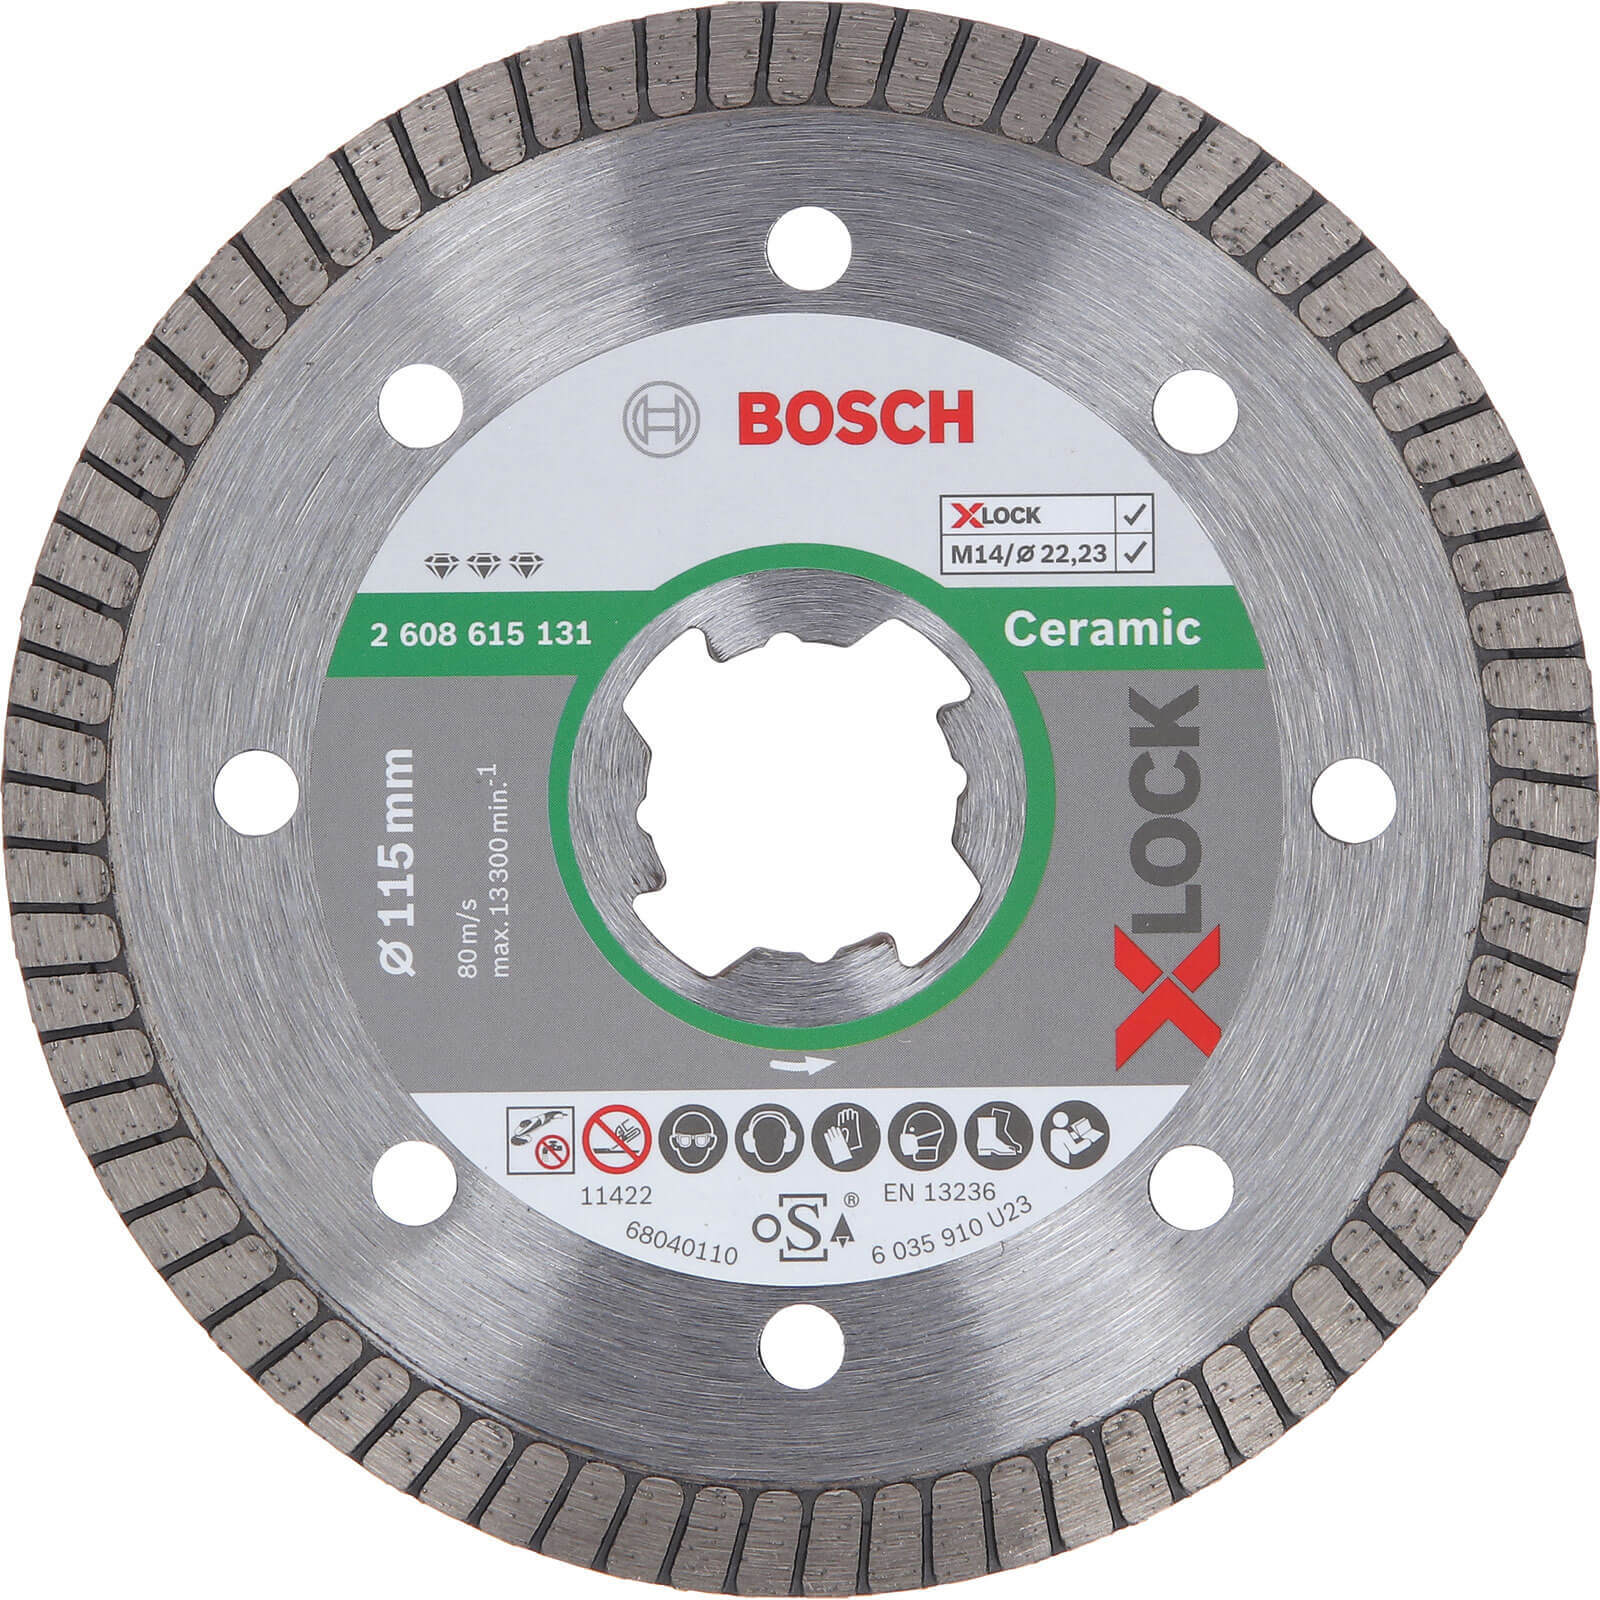 Photo of Bosch X Lock Best Extraclean Turbo Diamond Disc For Ceramics 115mm 1.4mm 22mm